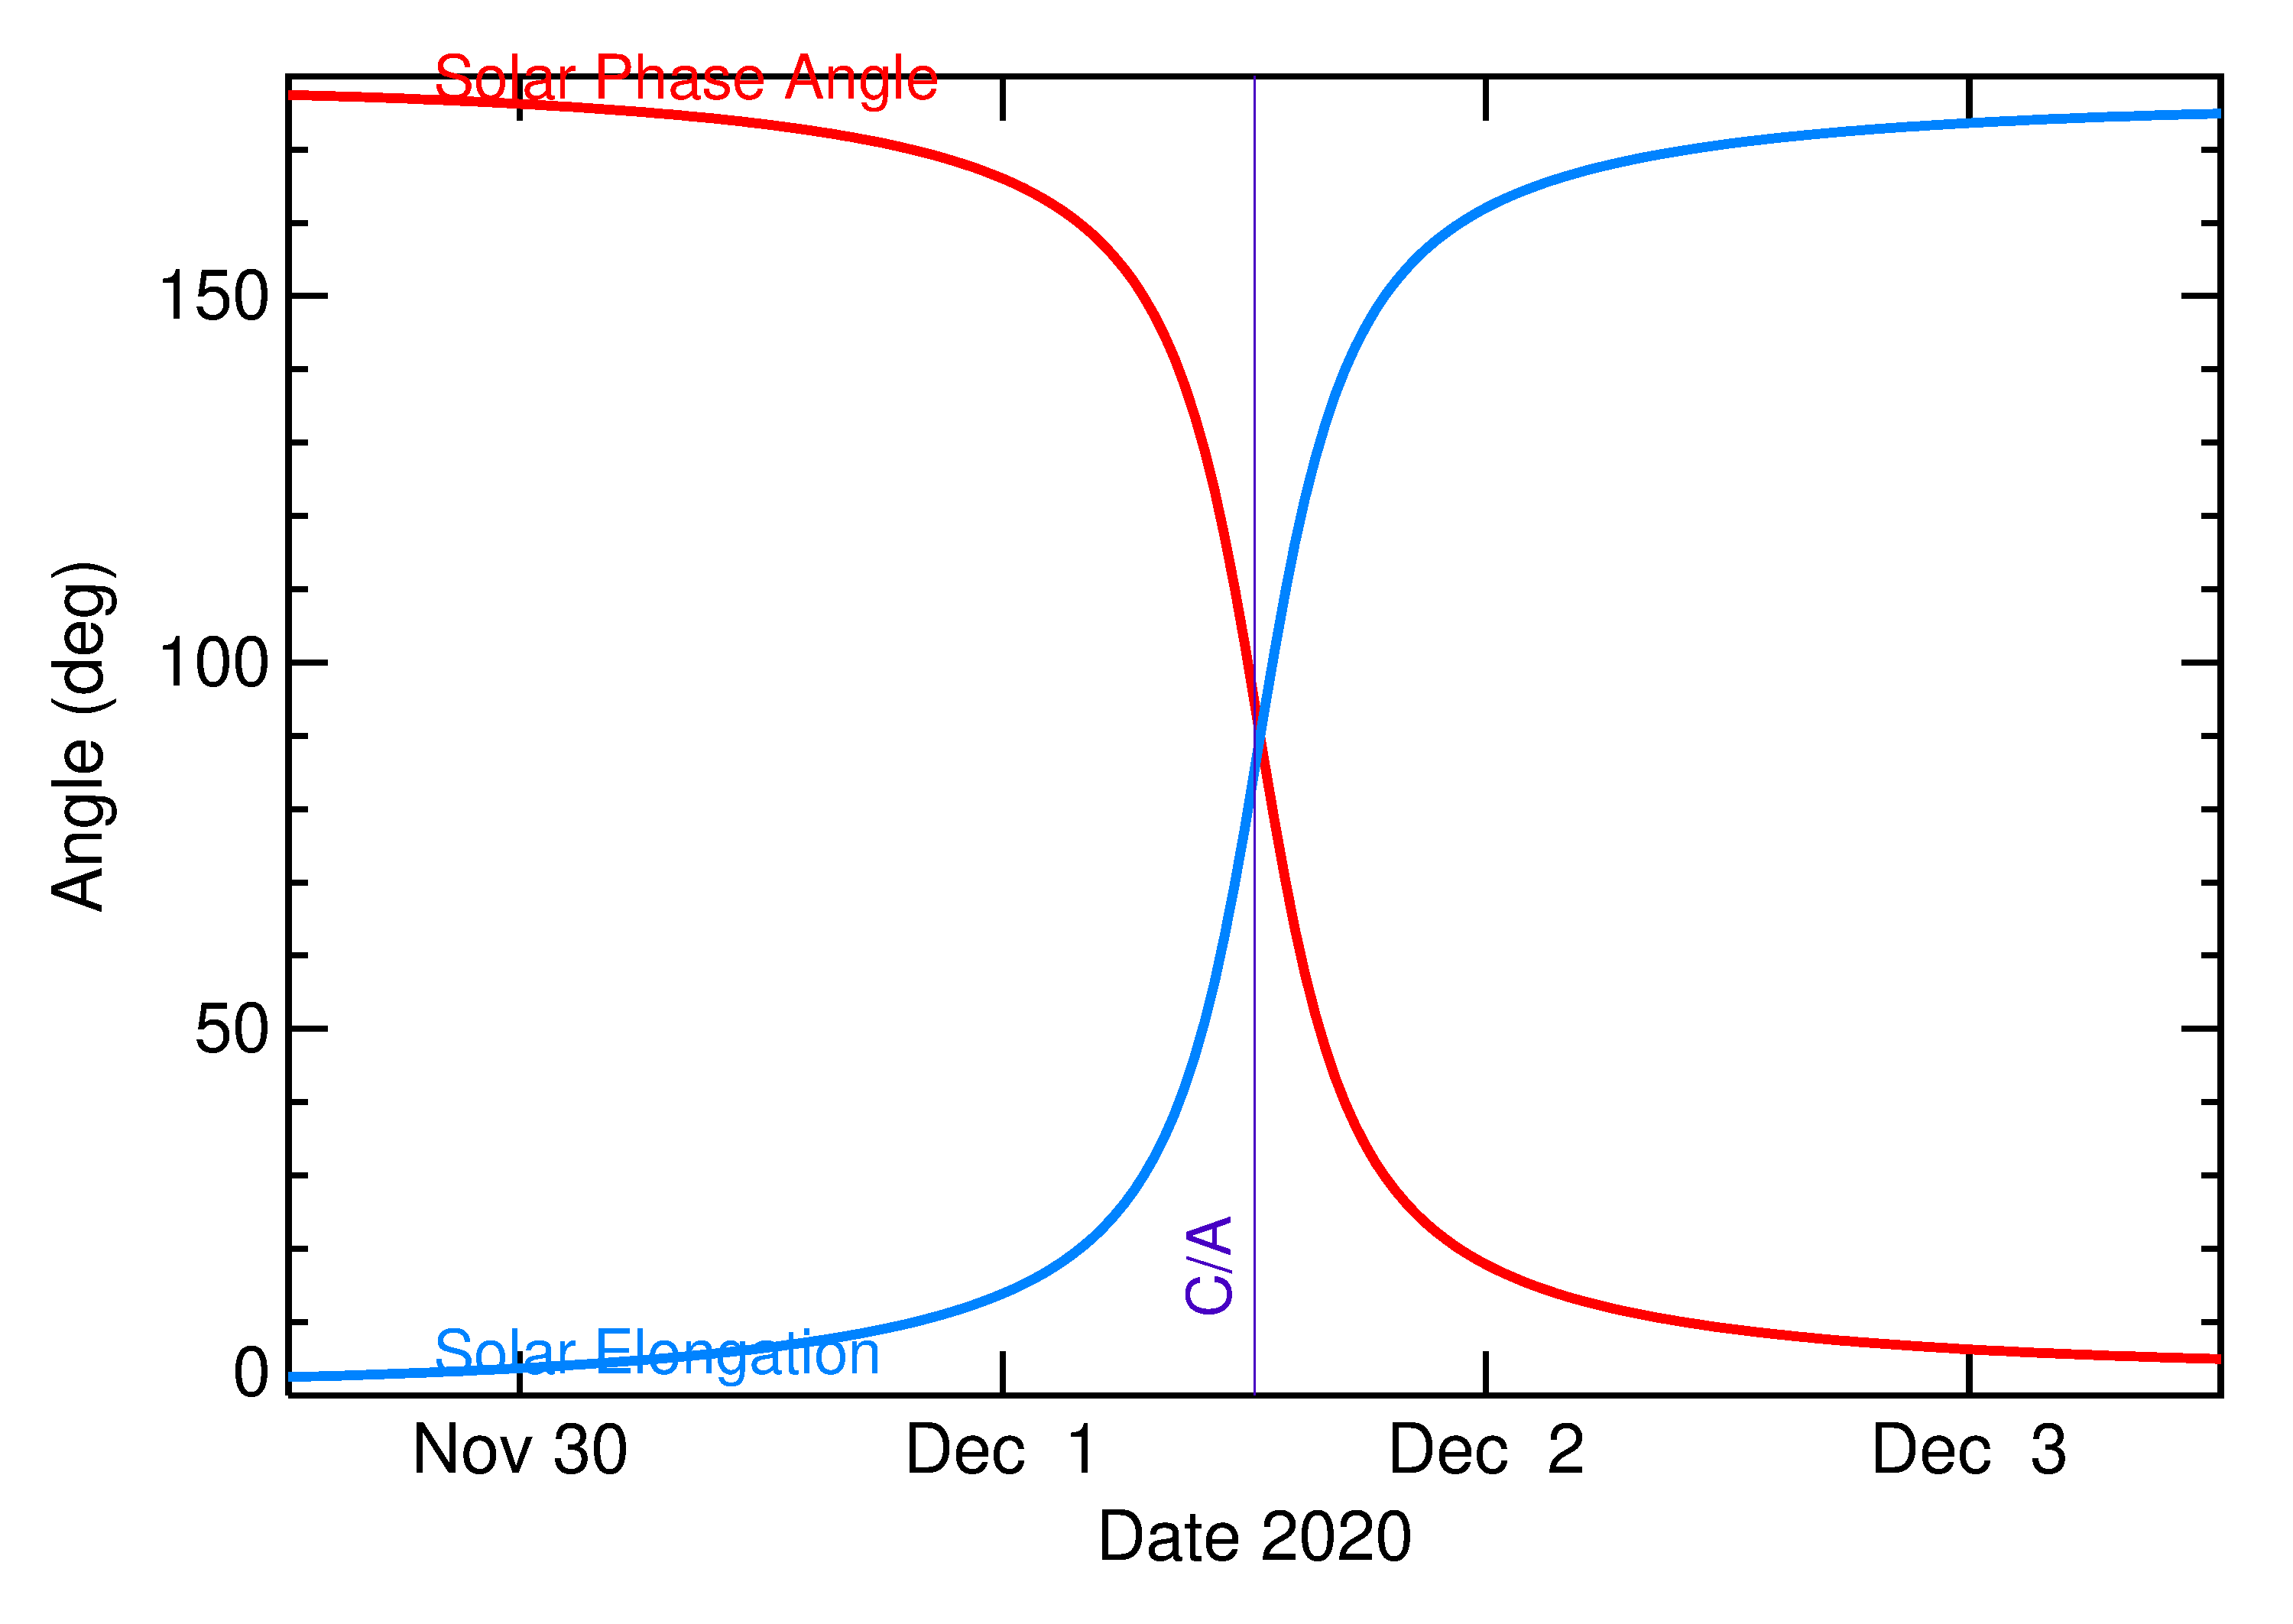 Solar Elongation and Solar Phase Angle of 2020 XE in the days around closest approach